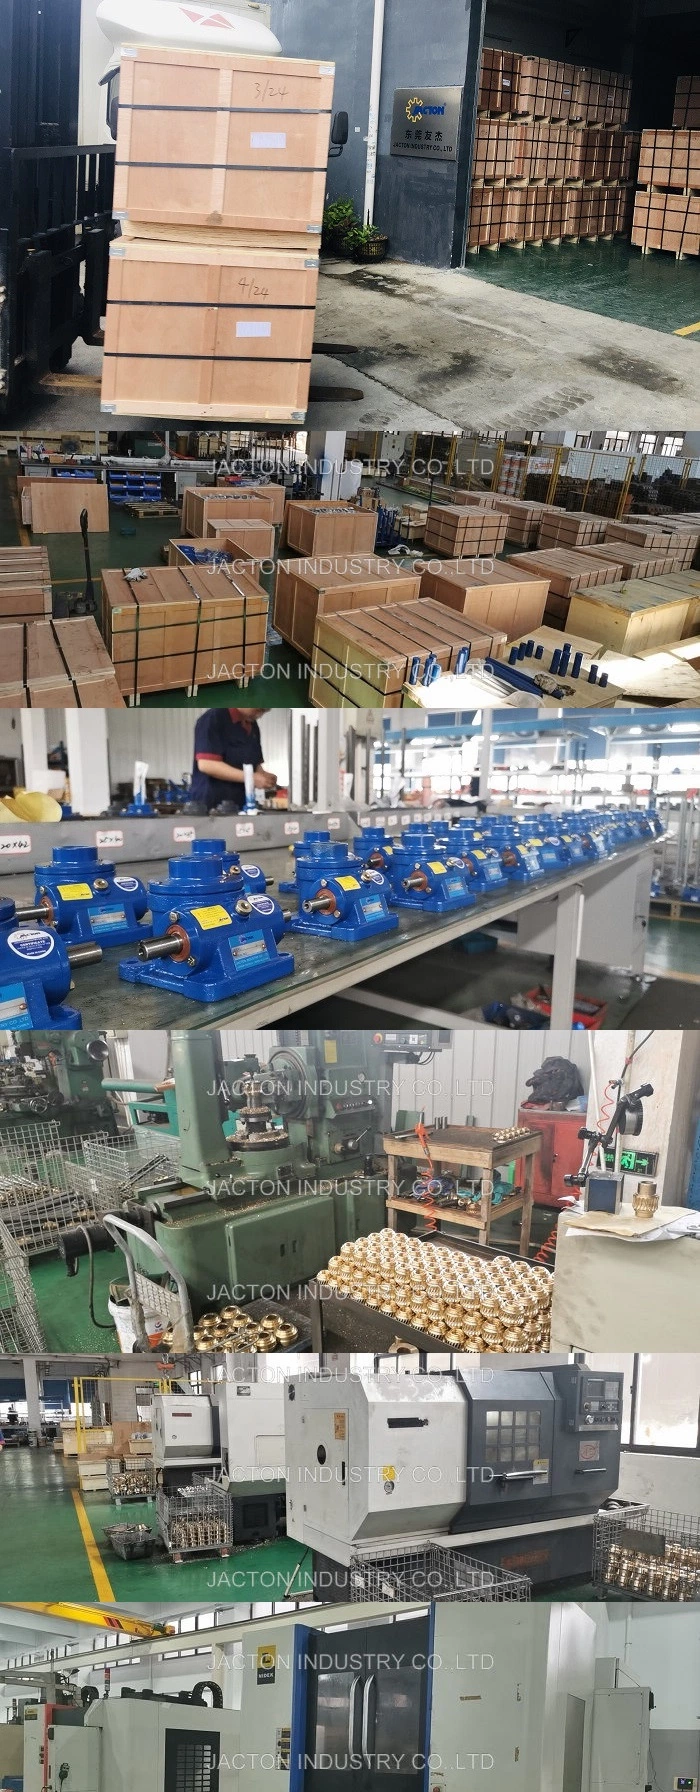 100kgf Industrial Linear Actuator Replace The Traditional Pneumatic Cylinders or Hydraulic Cylinder, Electric Cylinders Motors Linear Actuator